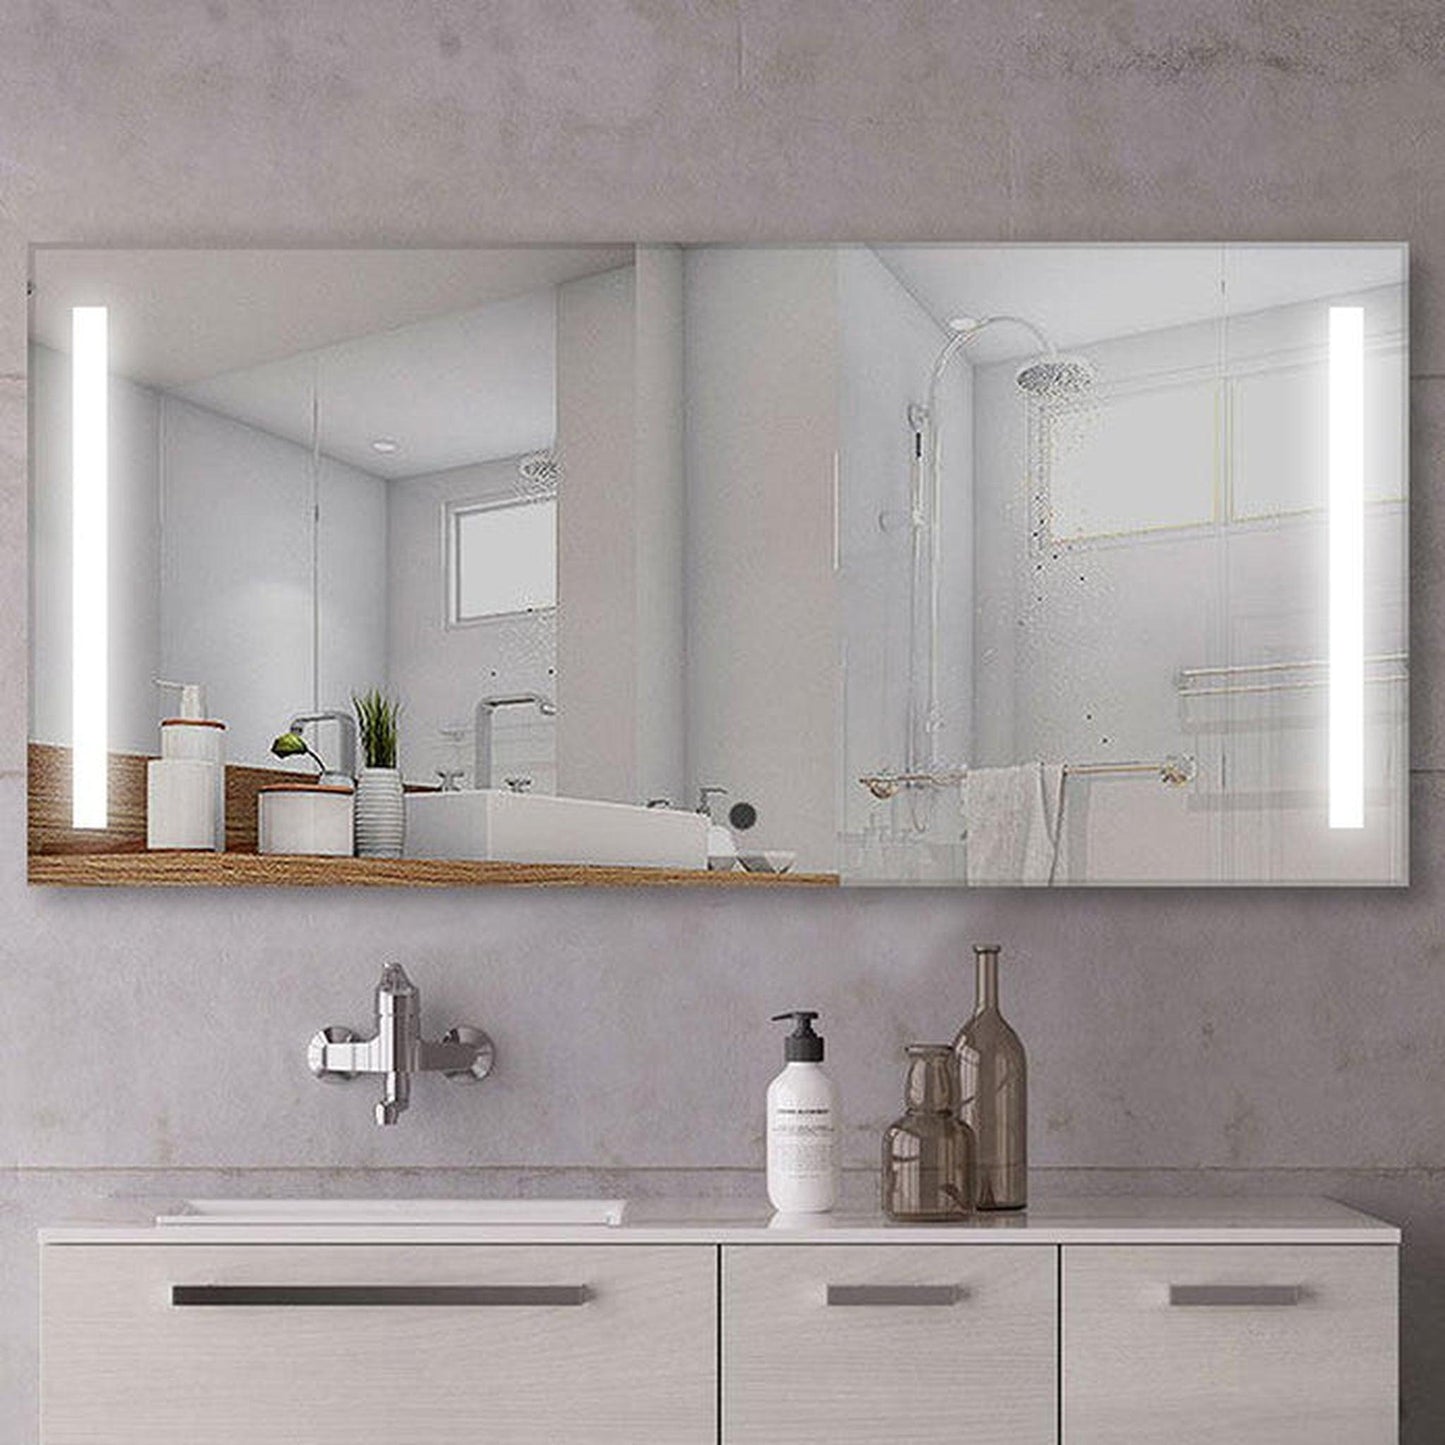 Vanity Art 60" W x 28" H LED Lighted Bathroom Vanity Wall Mirror With Touch Sensor Switch